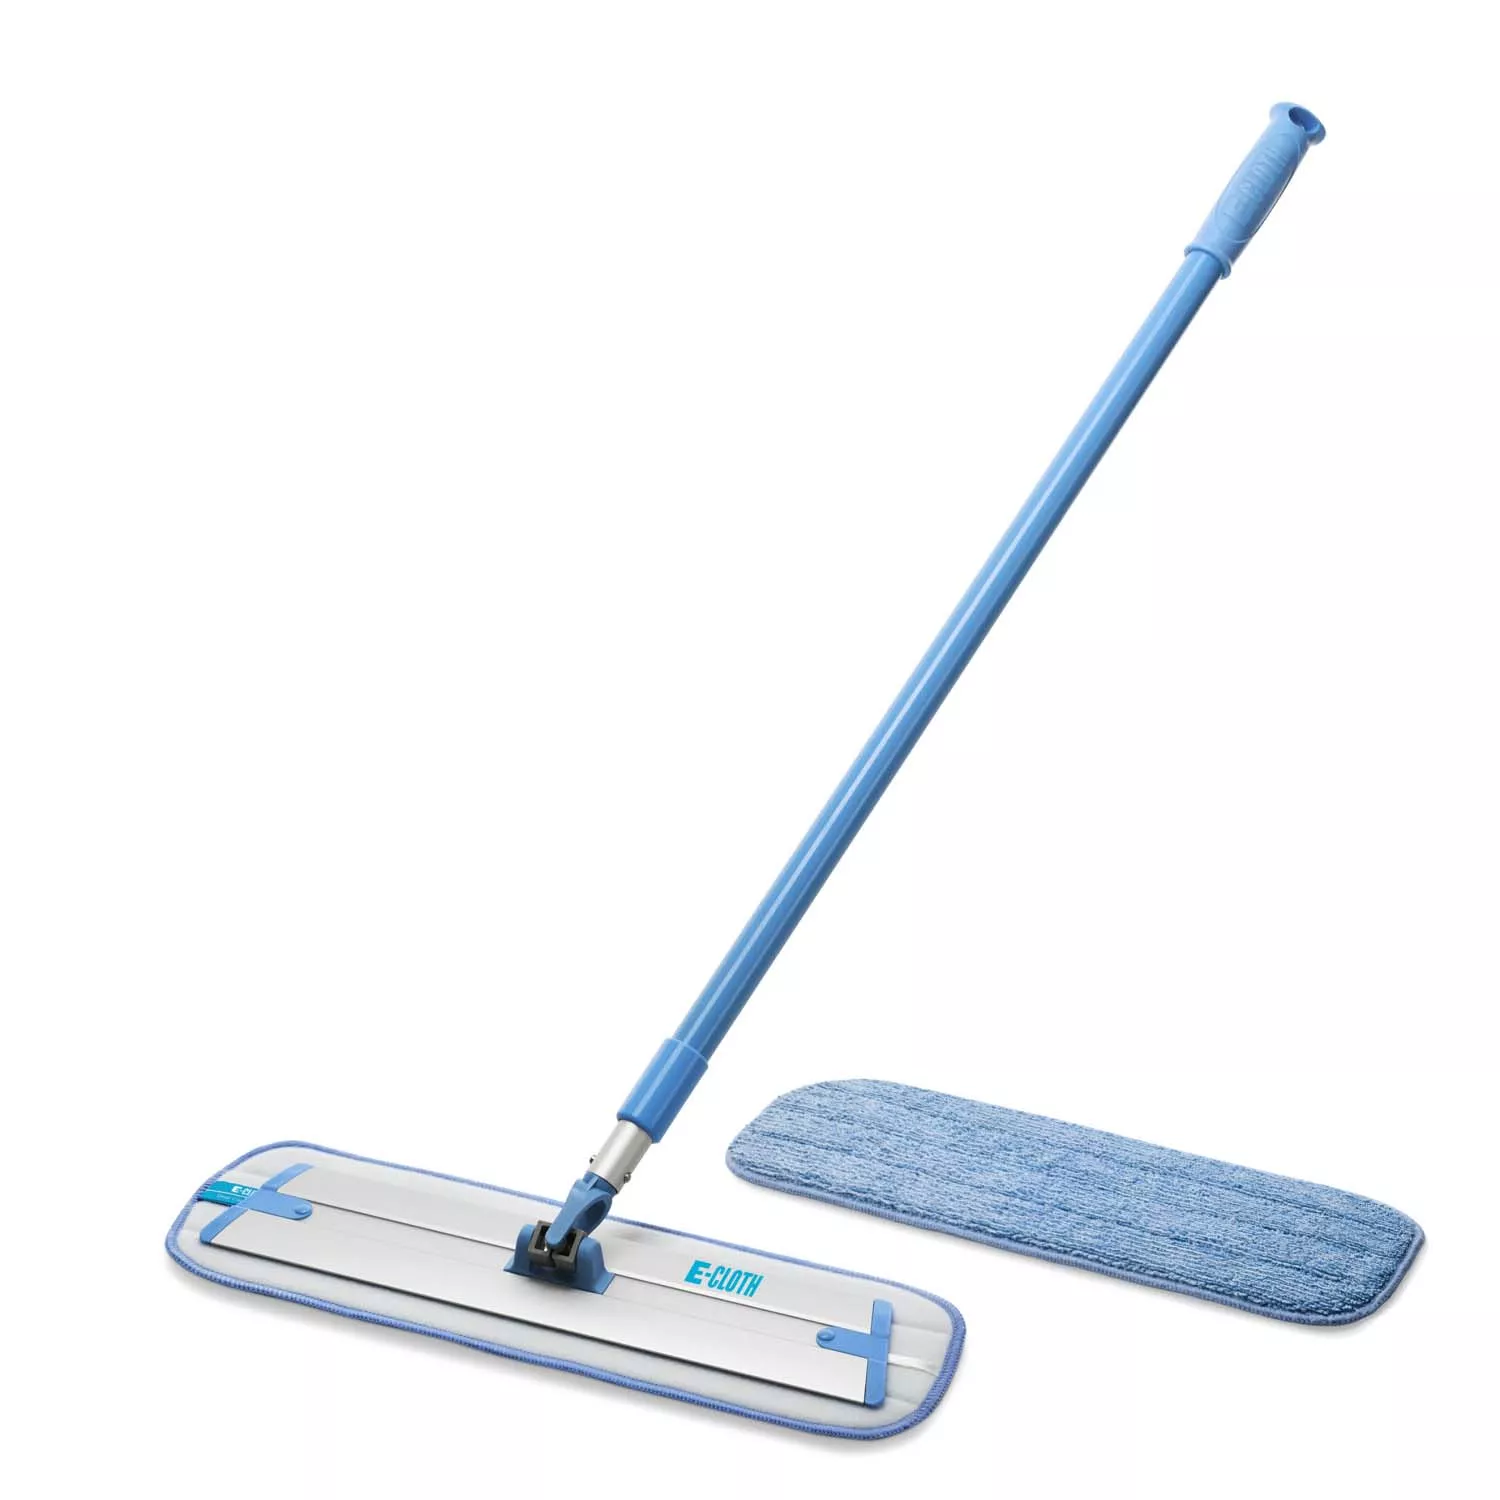 The Turbo Microfiber Mop Floor Cleaning System Is on Sale for $22